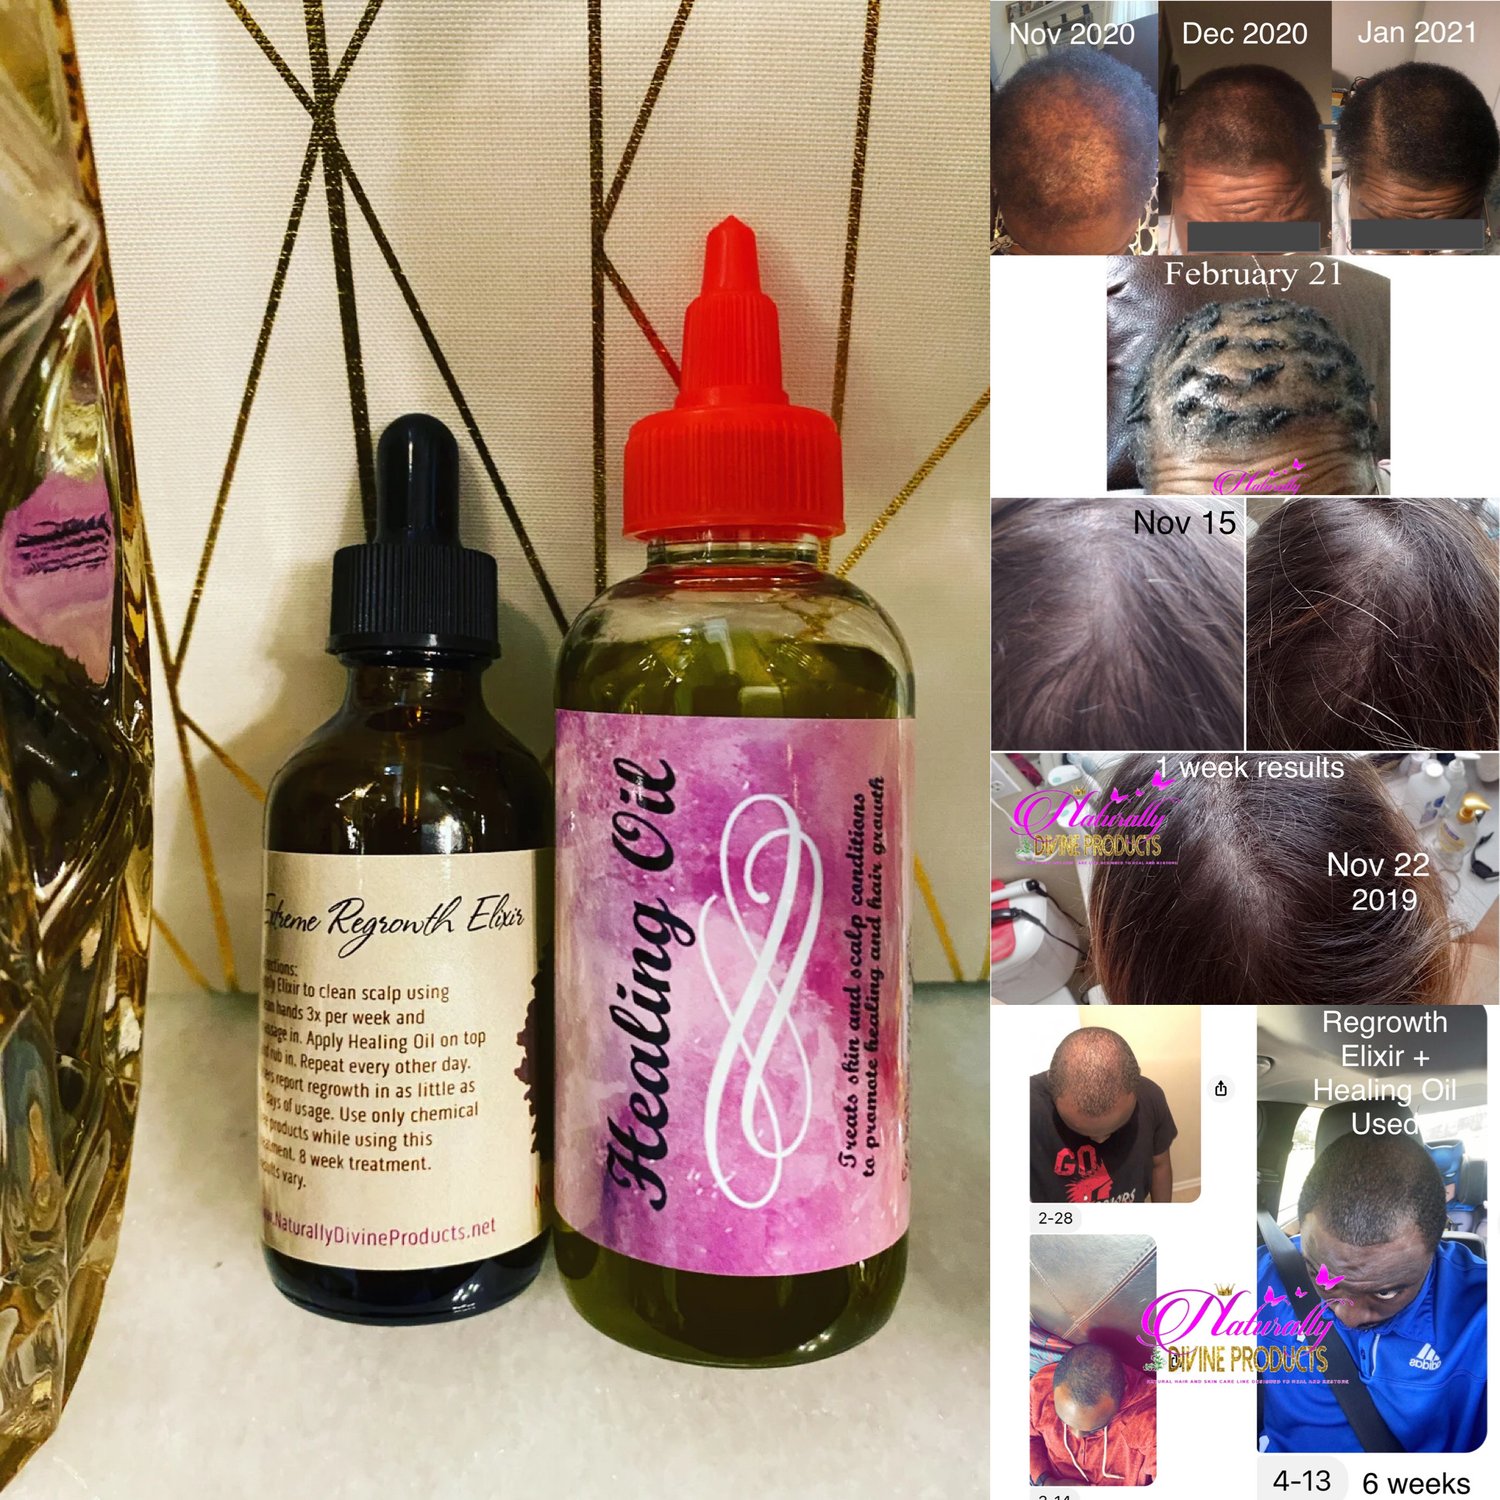 Category: Extreme Hair Regrowth Elixir Systems | Naturally Divine Products®  ~ The Brand That Heals®